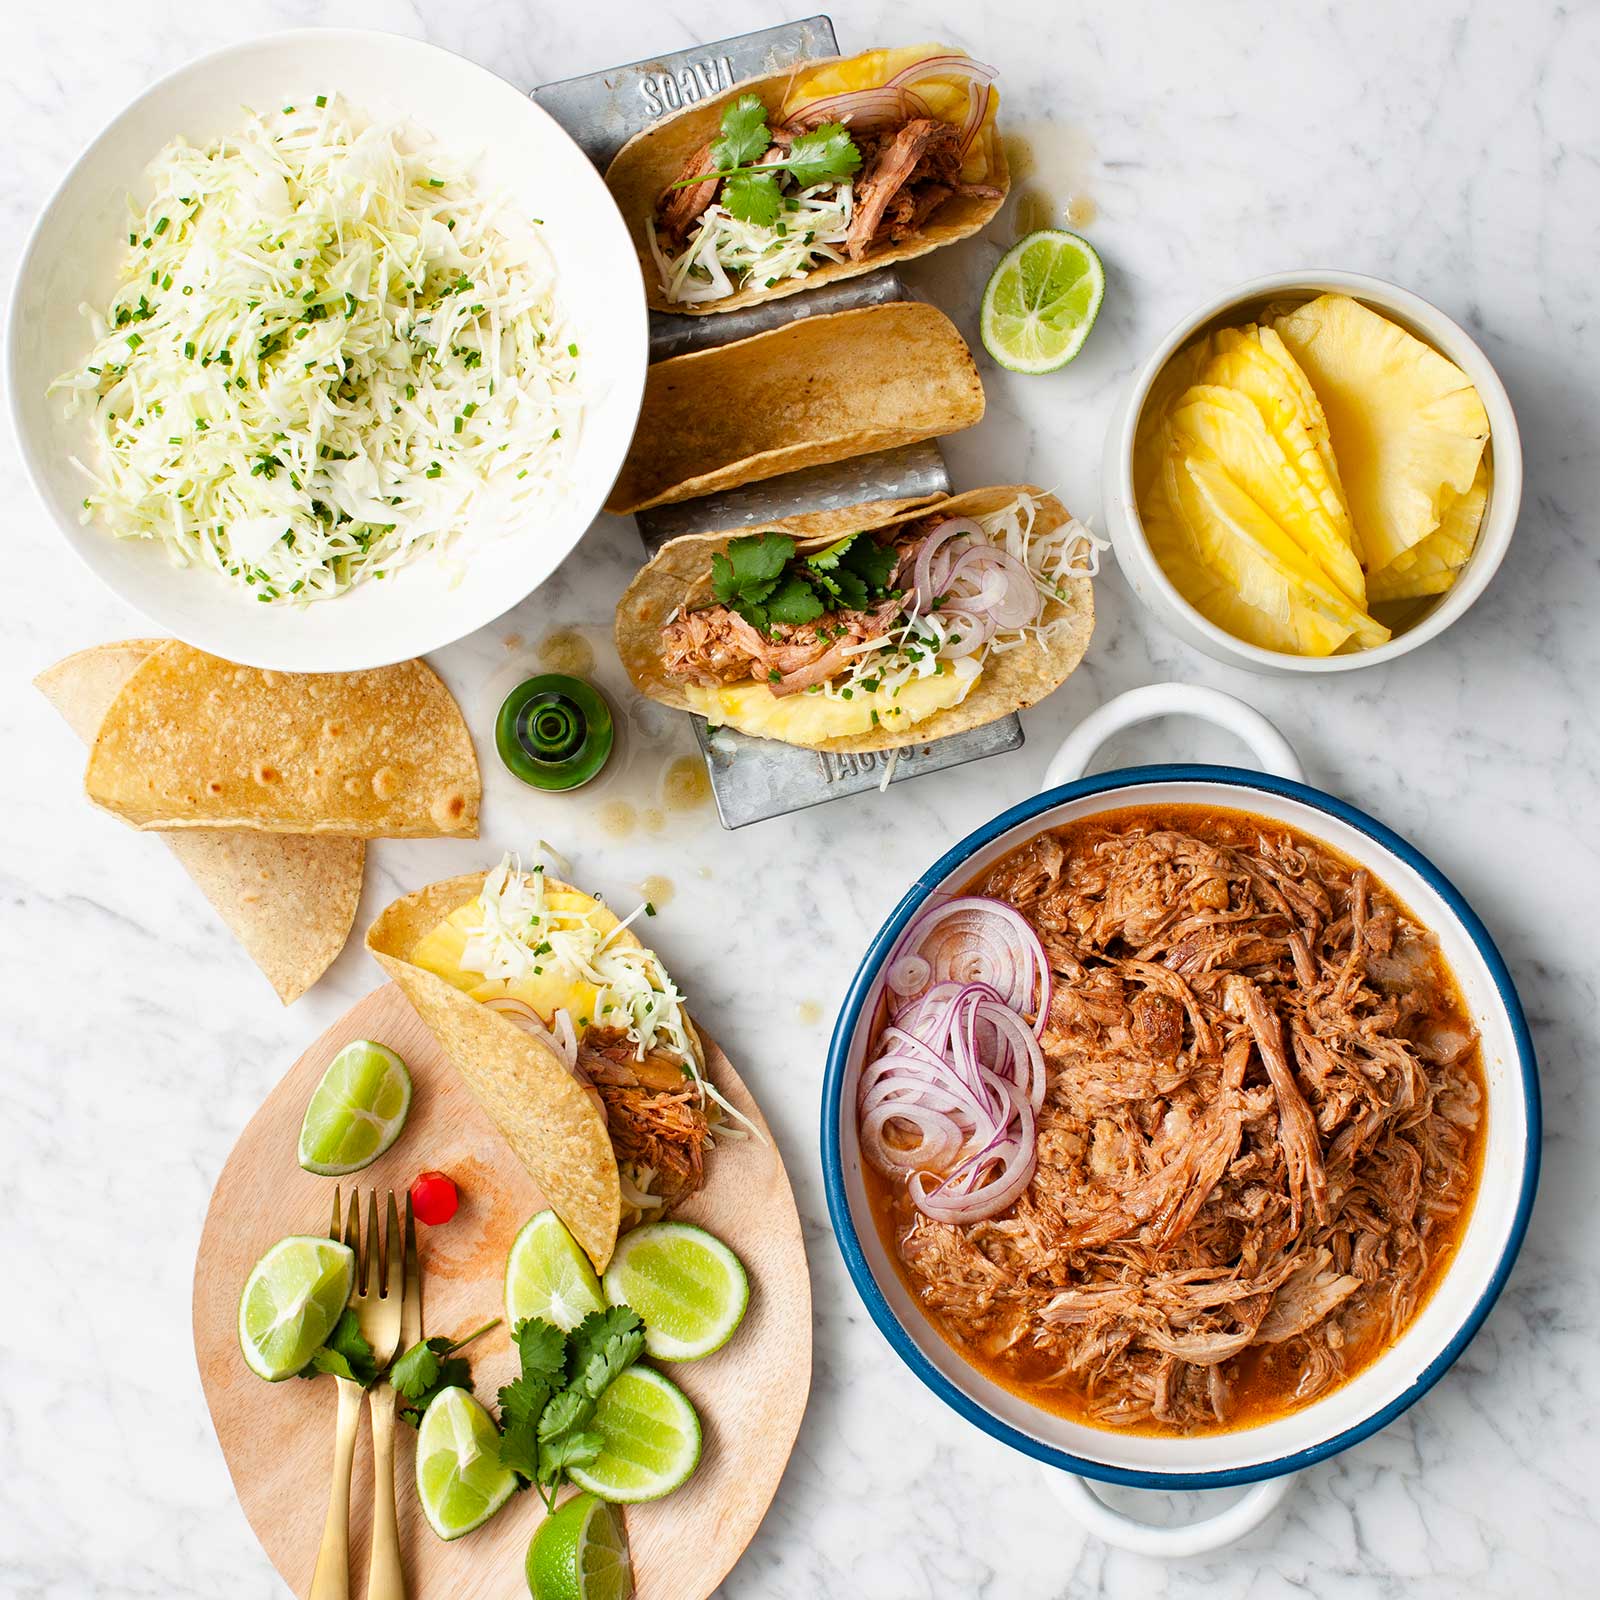 Overhead shot of pulled pork in a white enamel dish with pickled pineapple in a bowl. Two hard tacos are also pictured filled with pulled pork and glazed pineapple. Lime slices are on a chopping board.